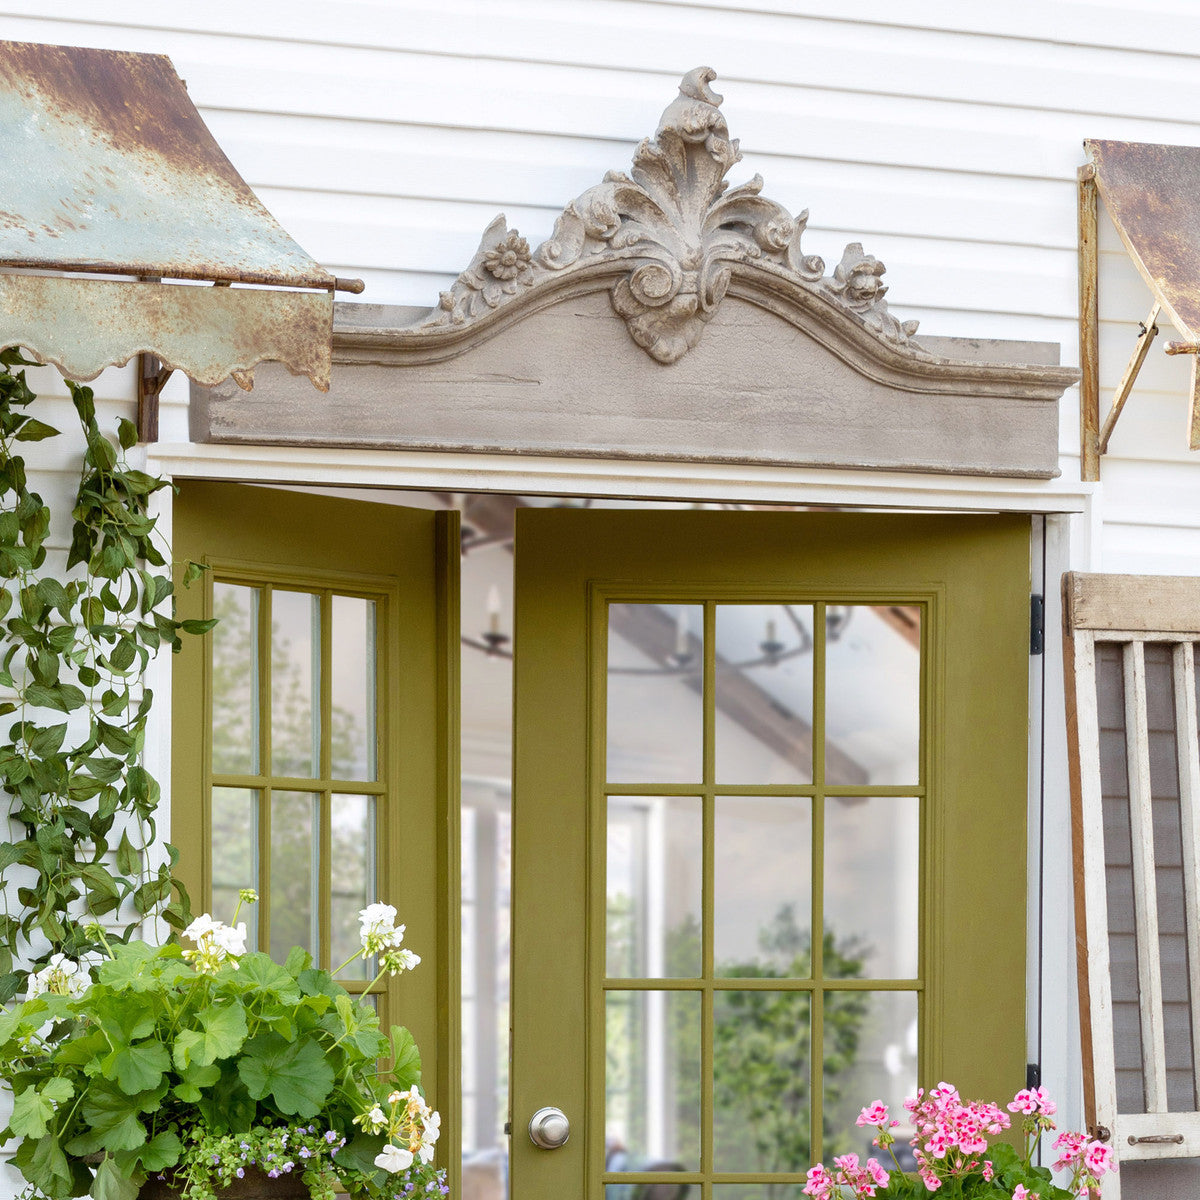 decorative-wood-pediment-outside-decor-on-garden-shed-over-green-door